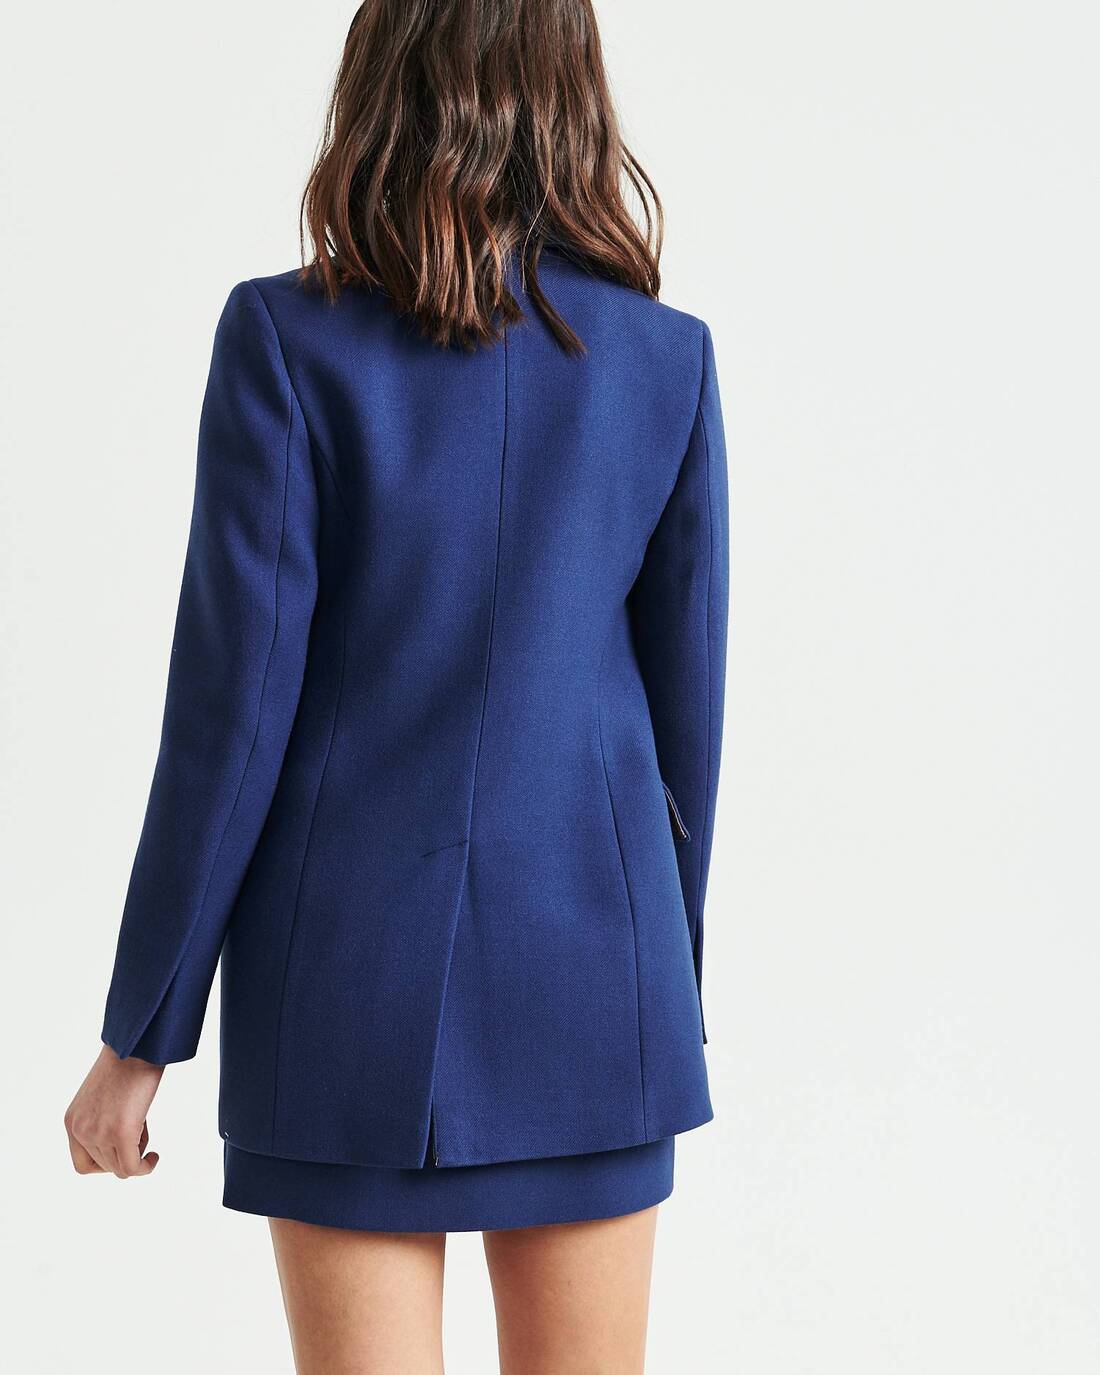 Fitted wool blazer with decorative stitching